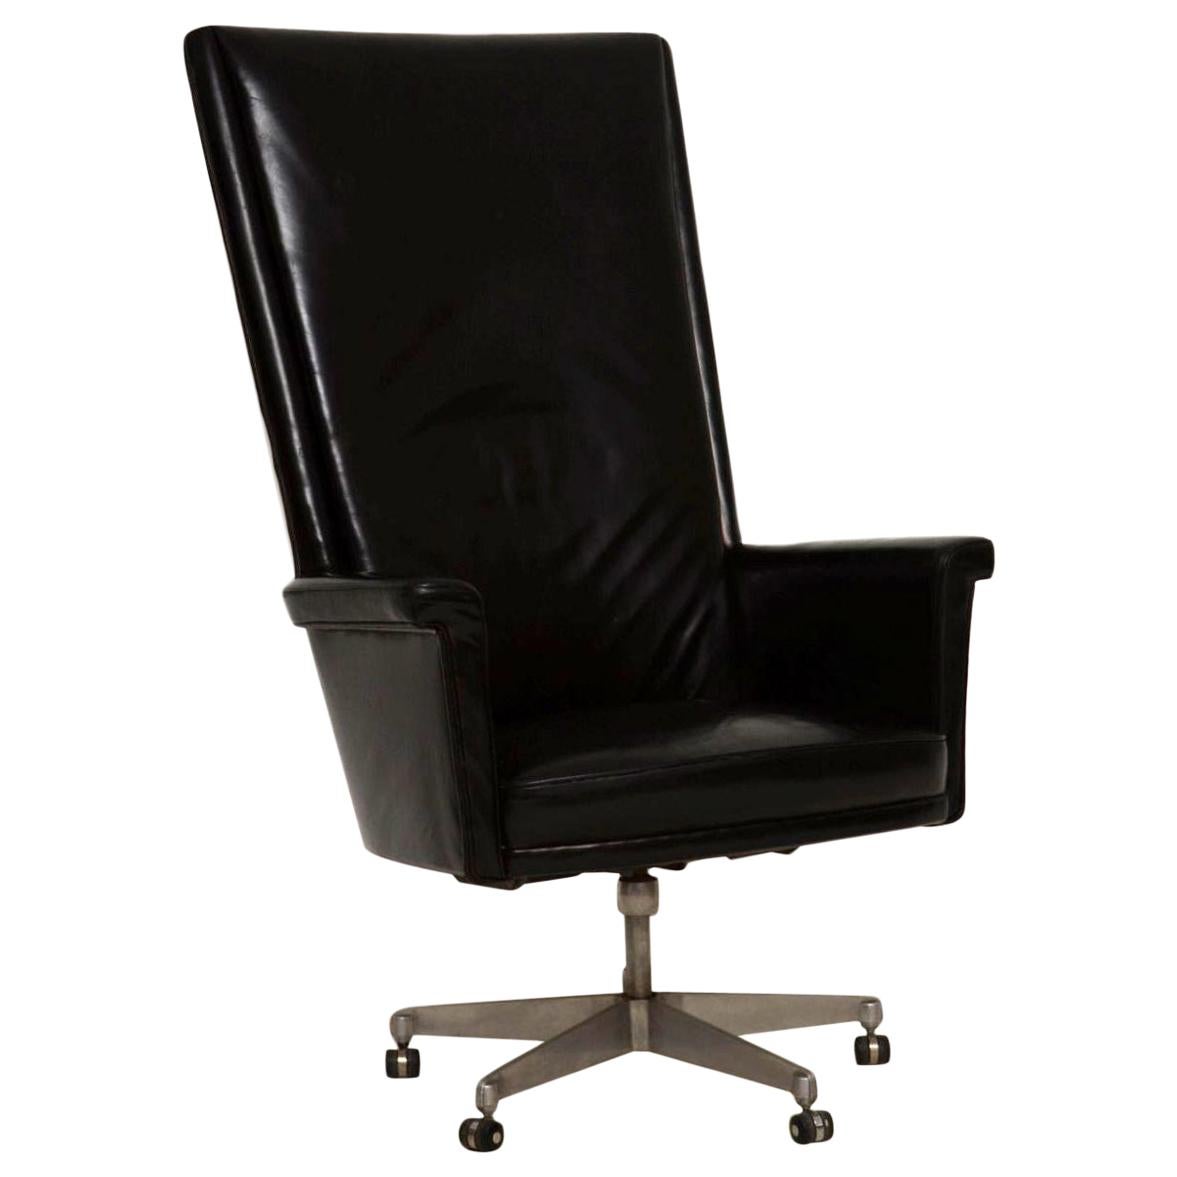 1960s Vintage Leather Swivel Desk Chair by John Home for Howard Keith